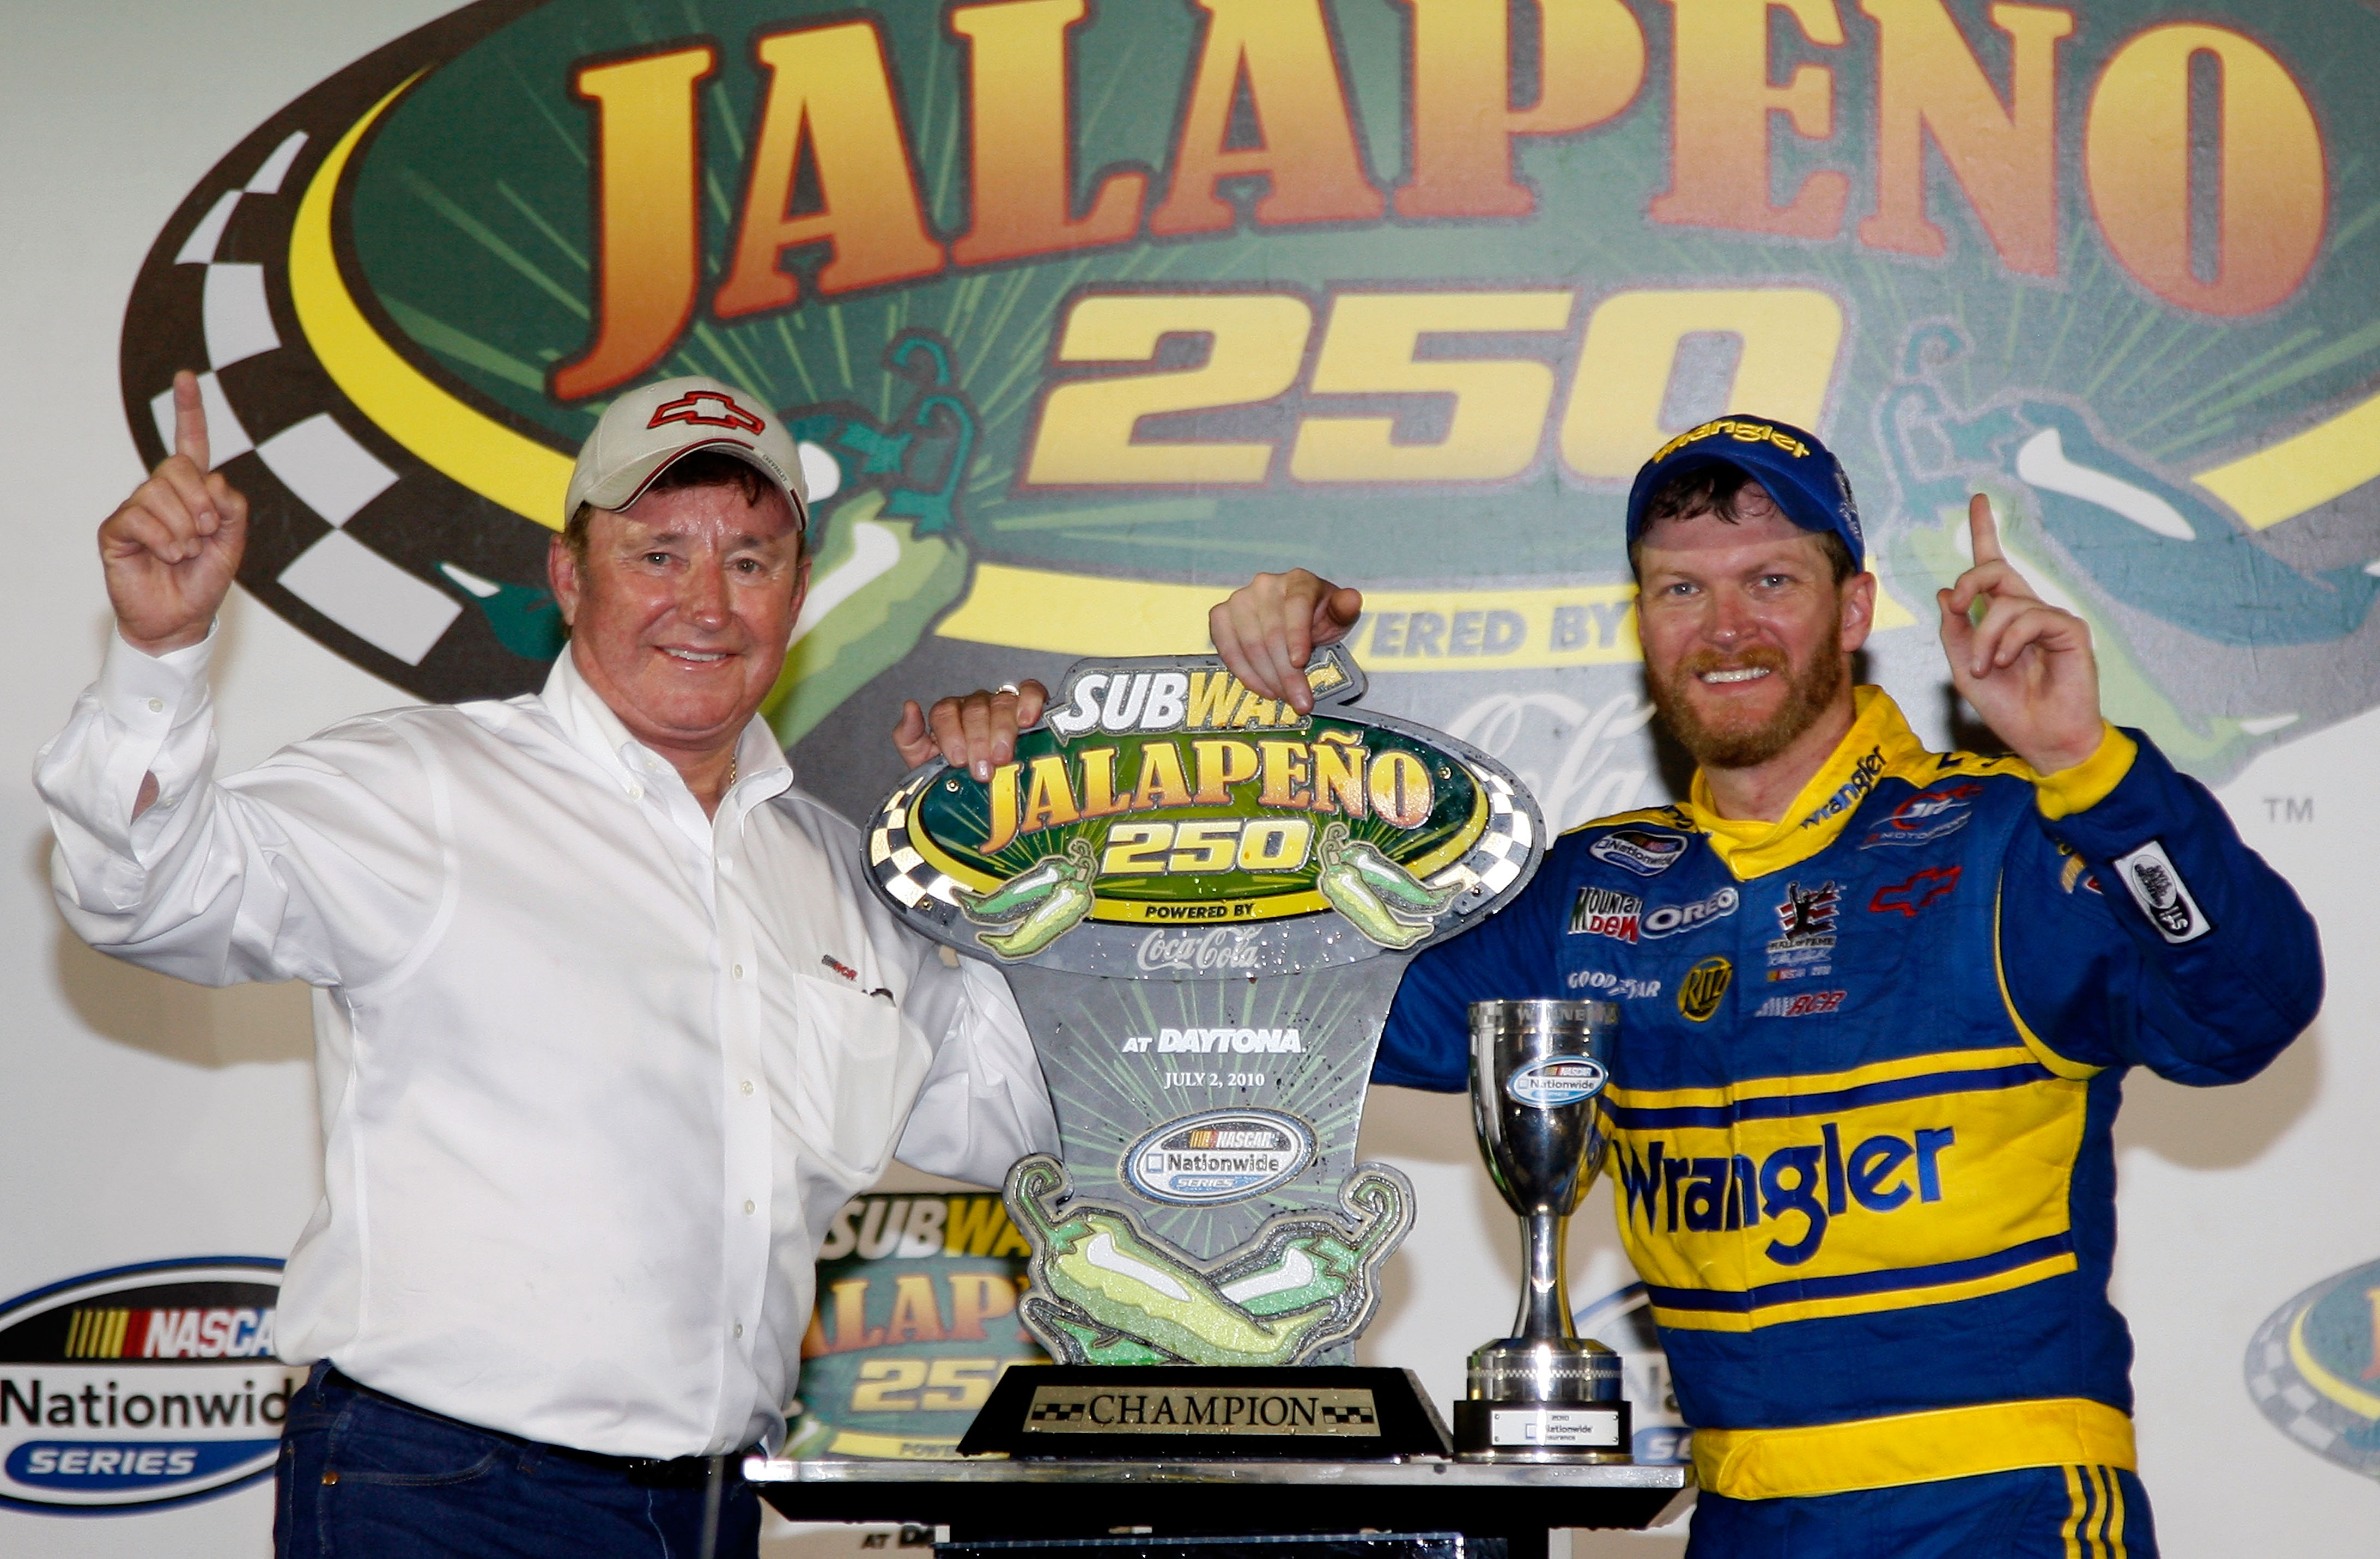 DAYTONA BEACH, FL - JULY 02:  Dale Earnhardt Jr. (R), driver of the #3 Wrangler Chevrolet, and team owner Richard Childress (L) pose in Victory Lane after winning the NASCAR Nationwide Series Subway Jalapeno 250 at Daytona International Speedway on July 2